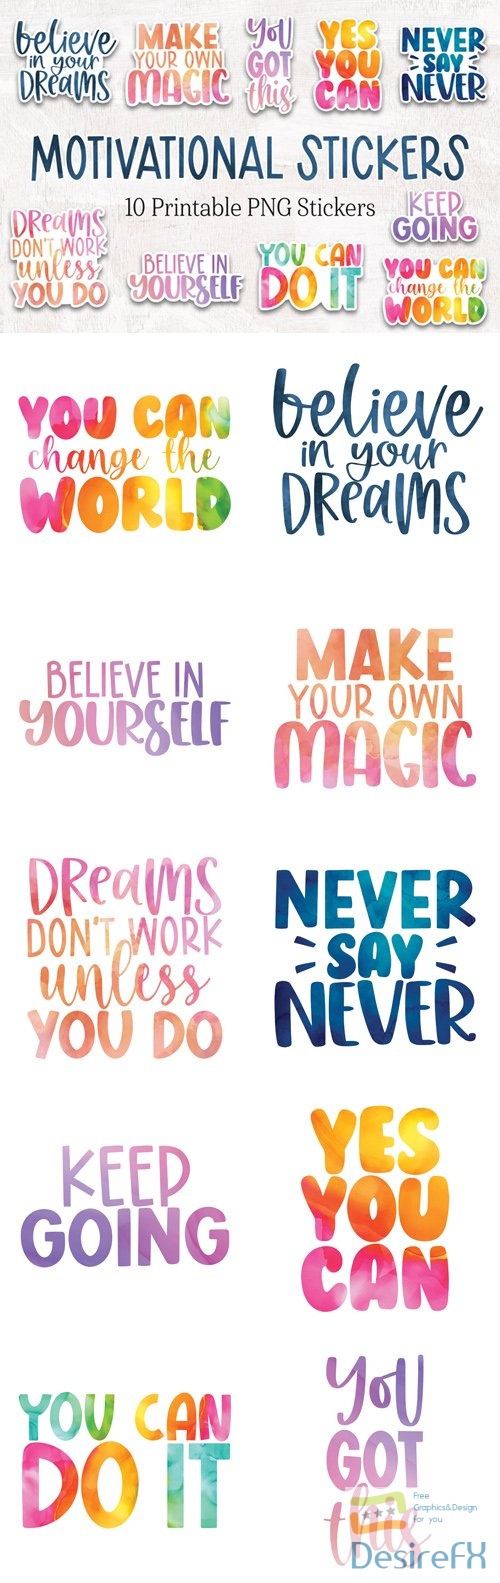 Motivational Stickers - 10 Printable Watercolor Stickers